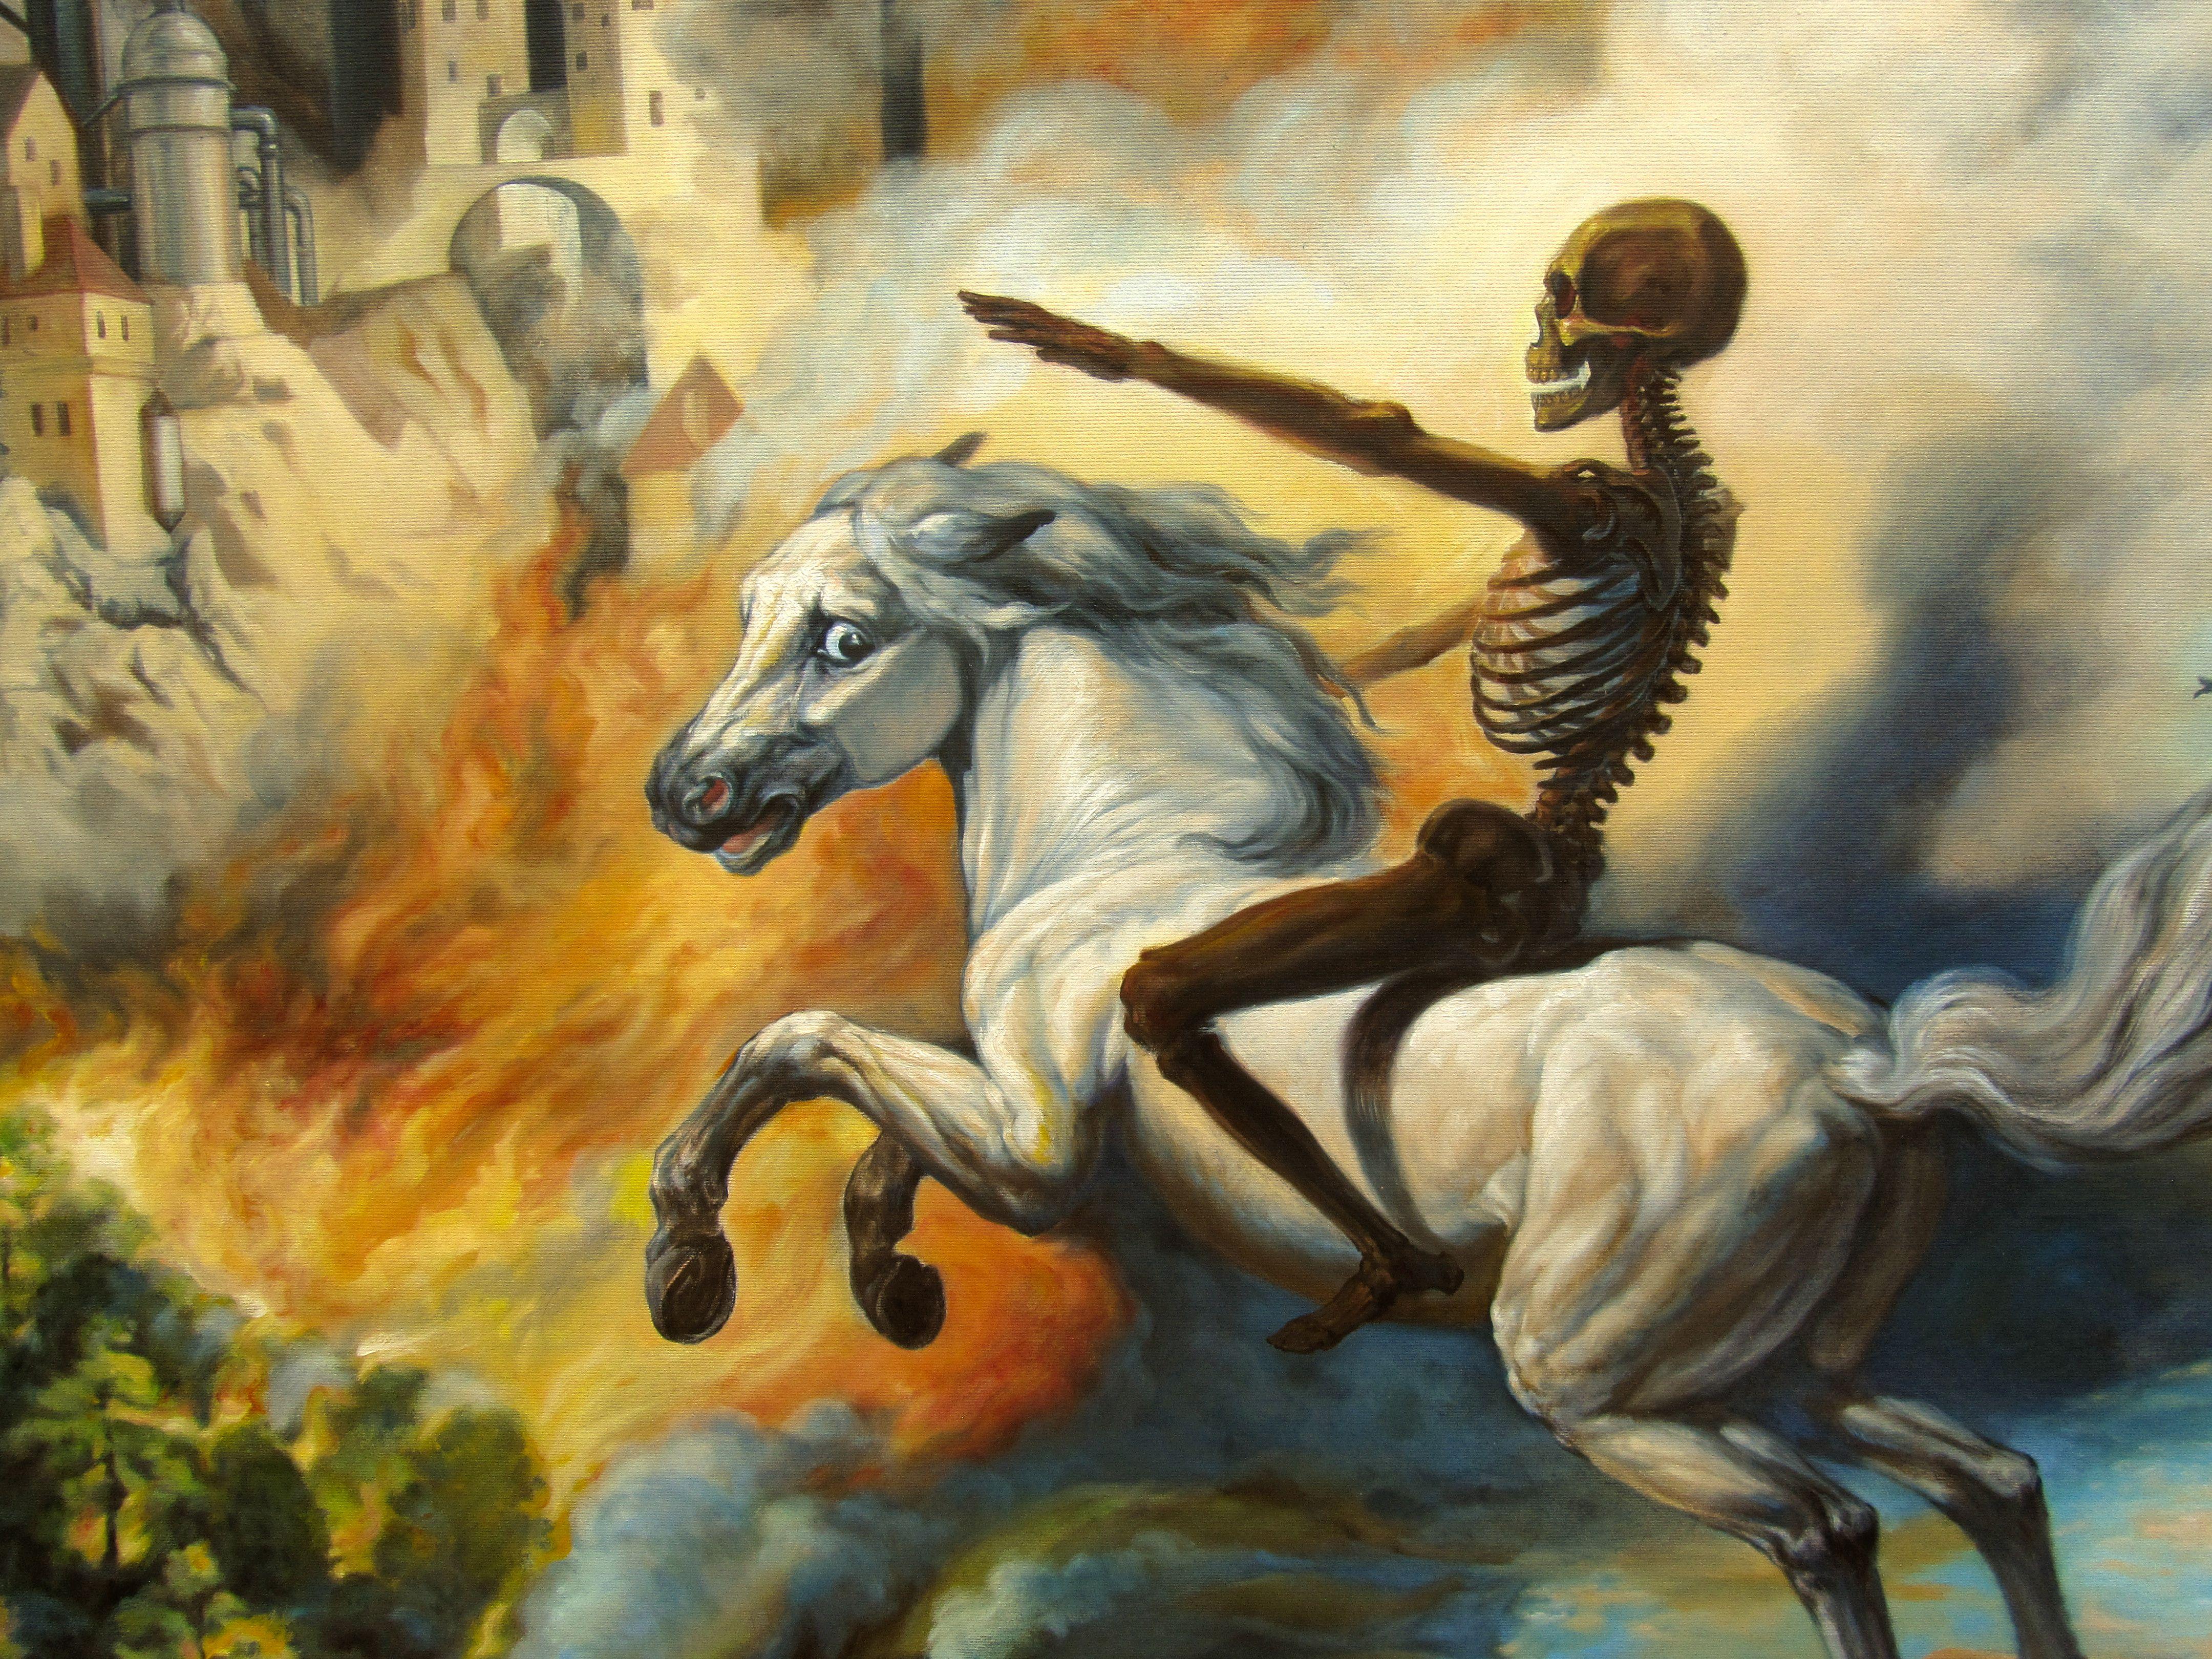 Forward to Death, Painting, Oil on Canvas 1